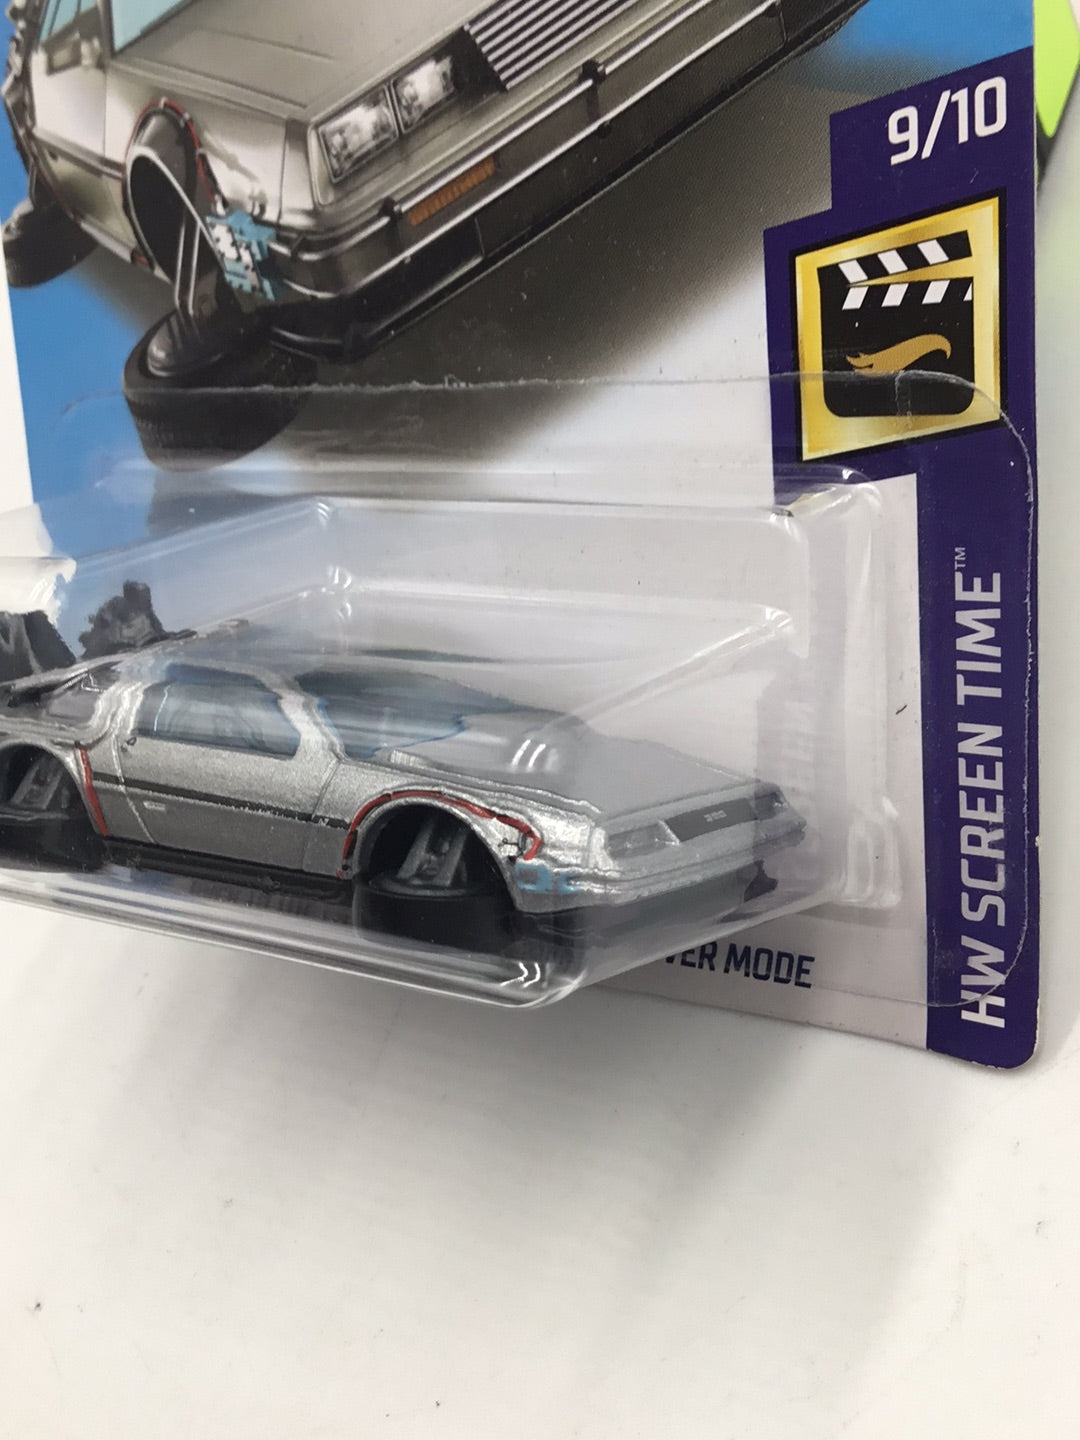 2019 hot wheels #108 Back to the future Time Machine hover mode